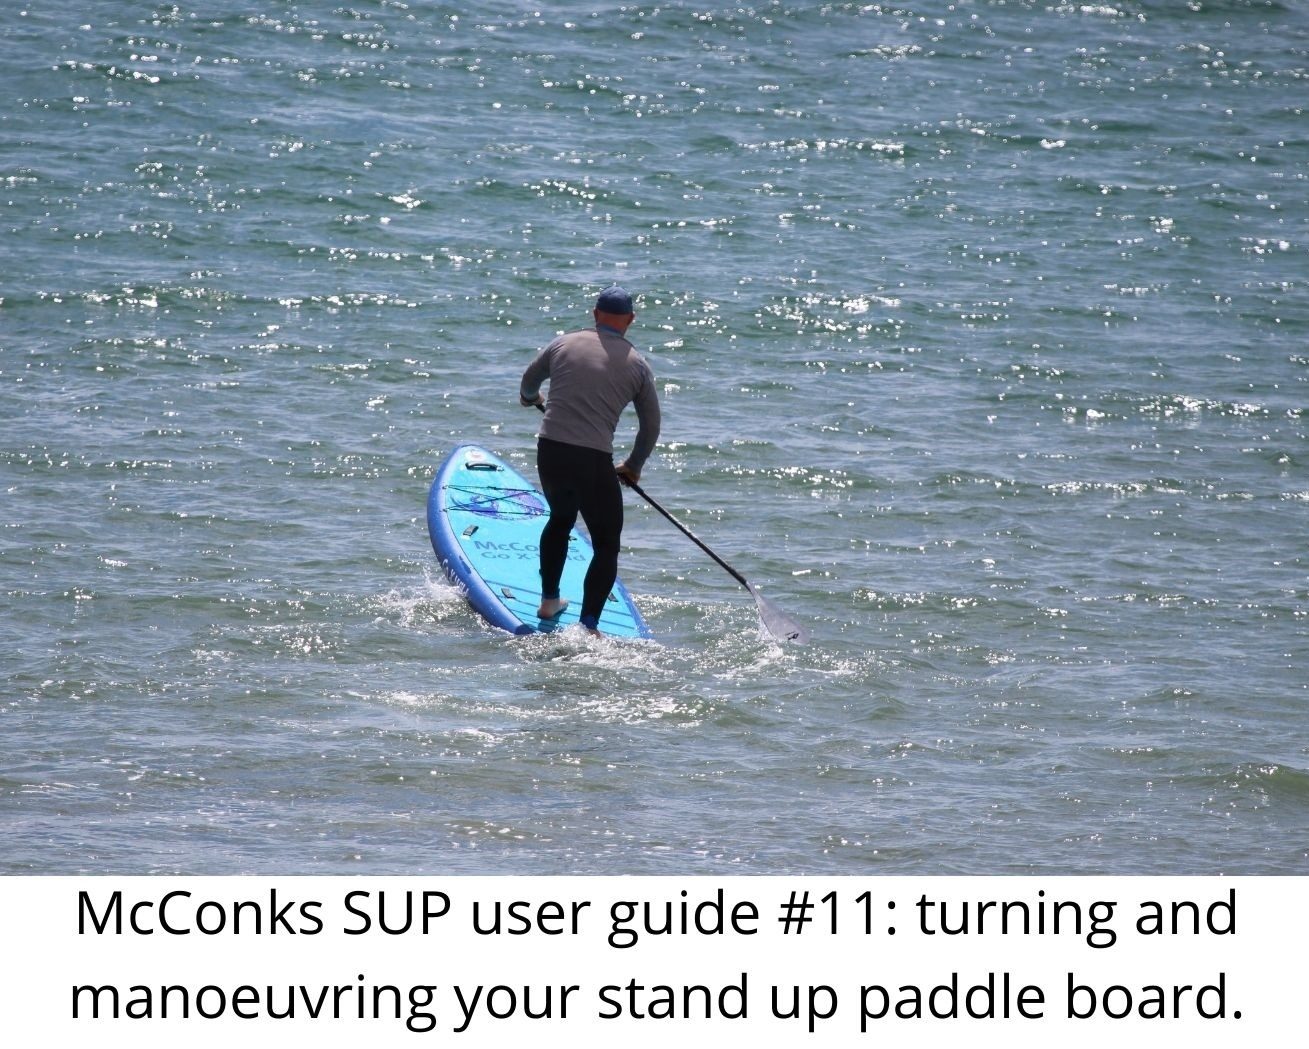 You are currently viewing McConks SUP user guide #11: turning your stand up paddle board.